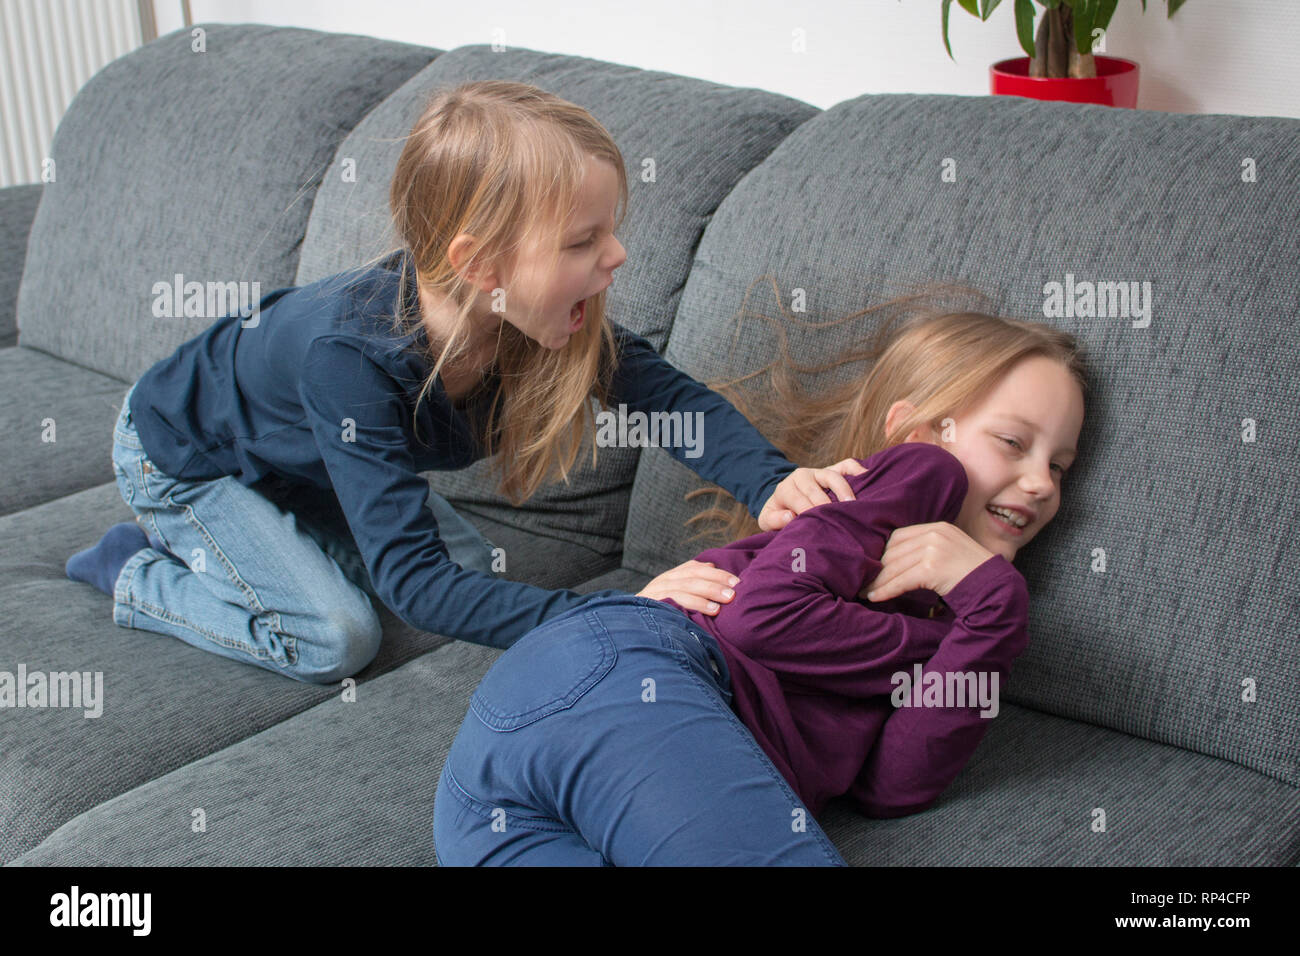 Girls shouts angry at another girl and is pushing her Stock Photo